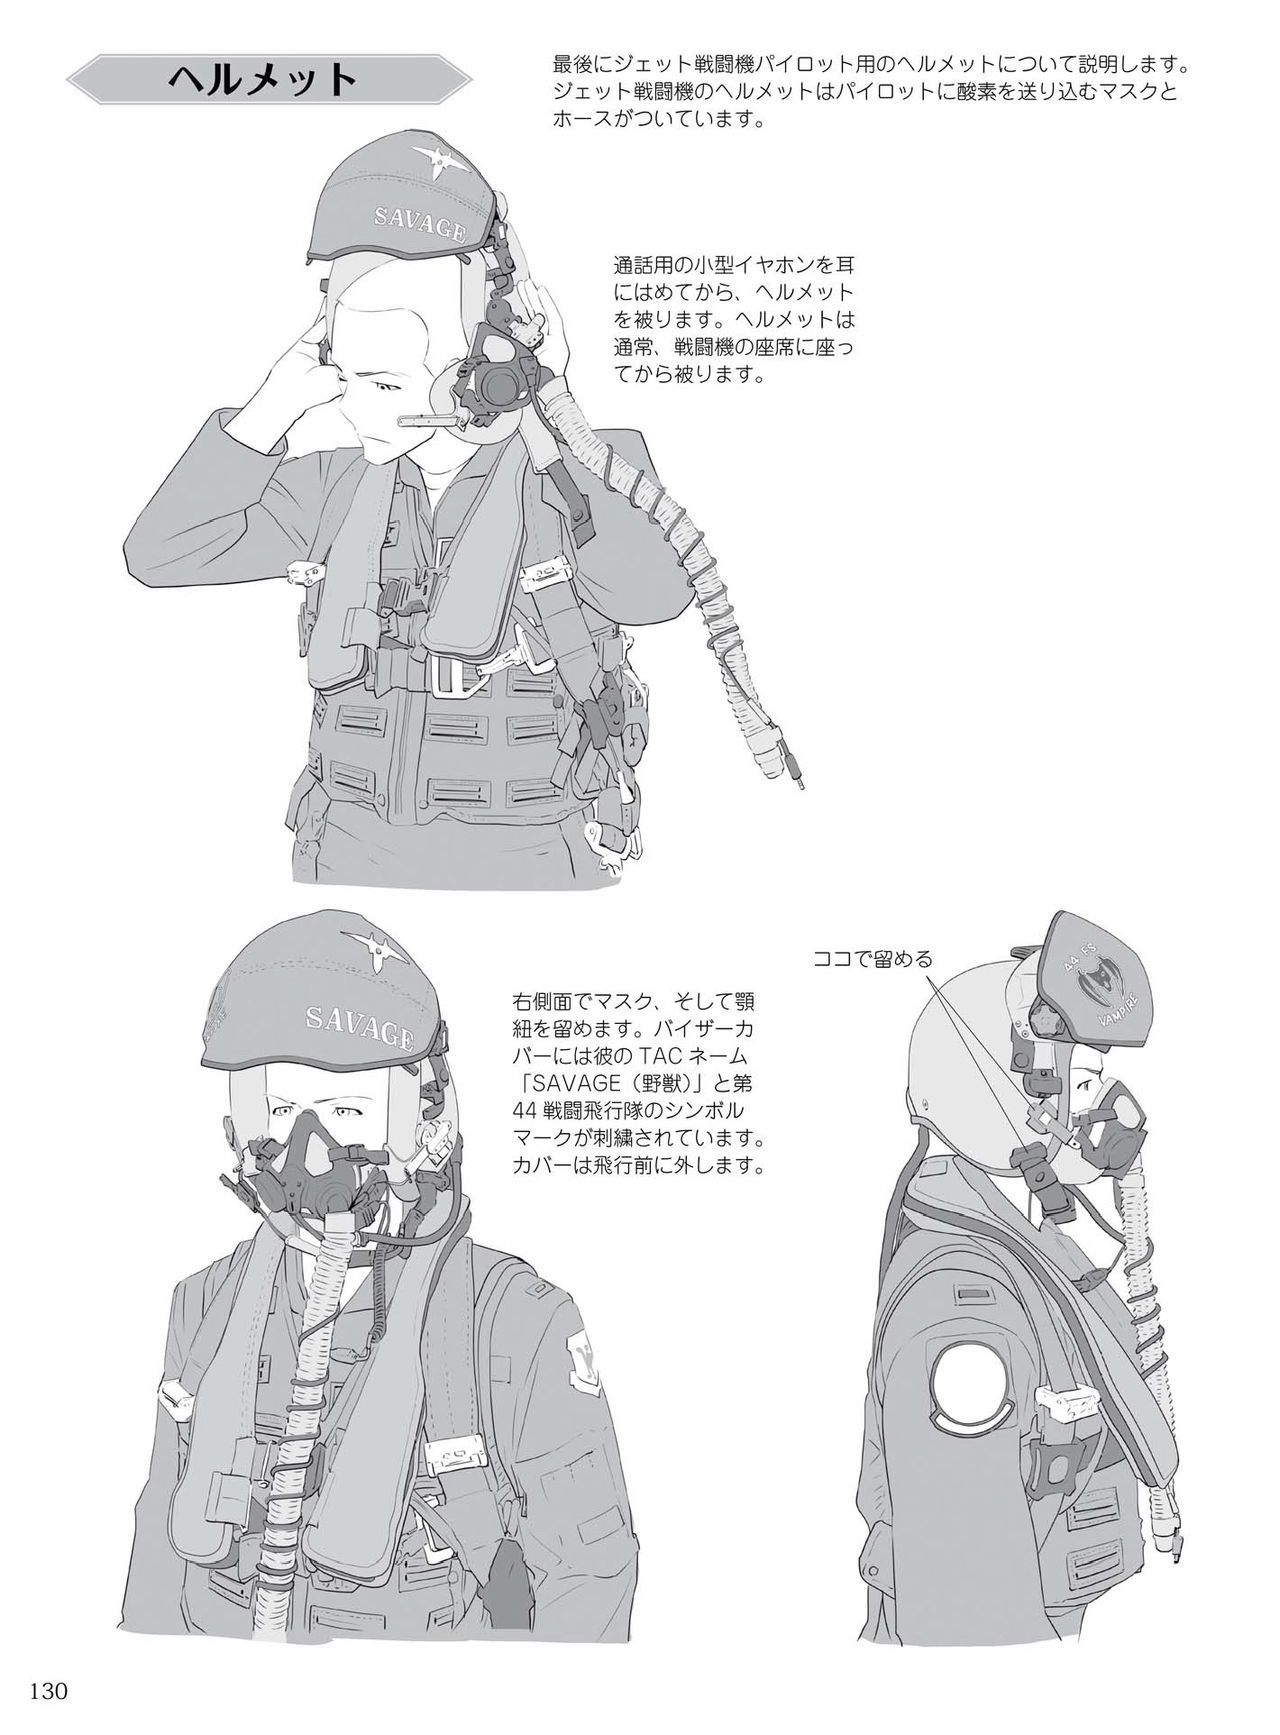 How to draw military uniforms and uniforms From Self-Defense Forces 軍服・制服の描き方 アメリカ軍・自衛隊の制服から戦闘服まで 133